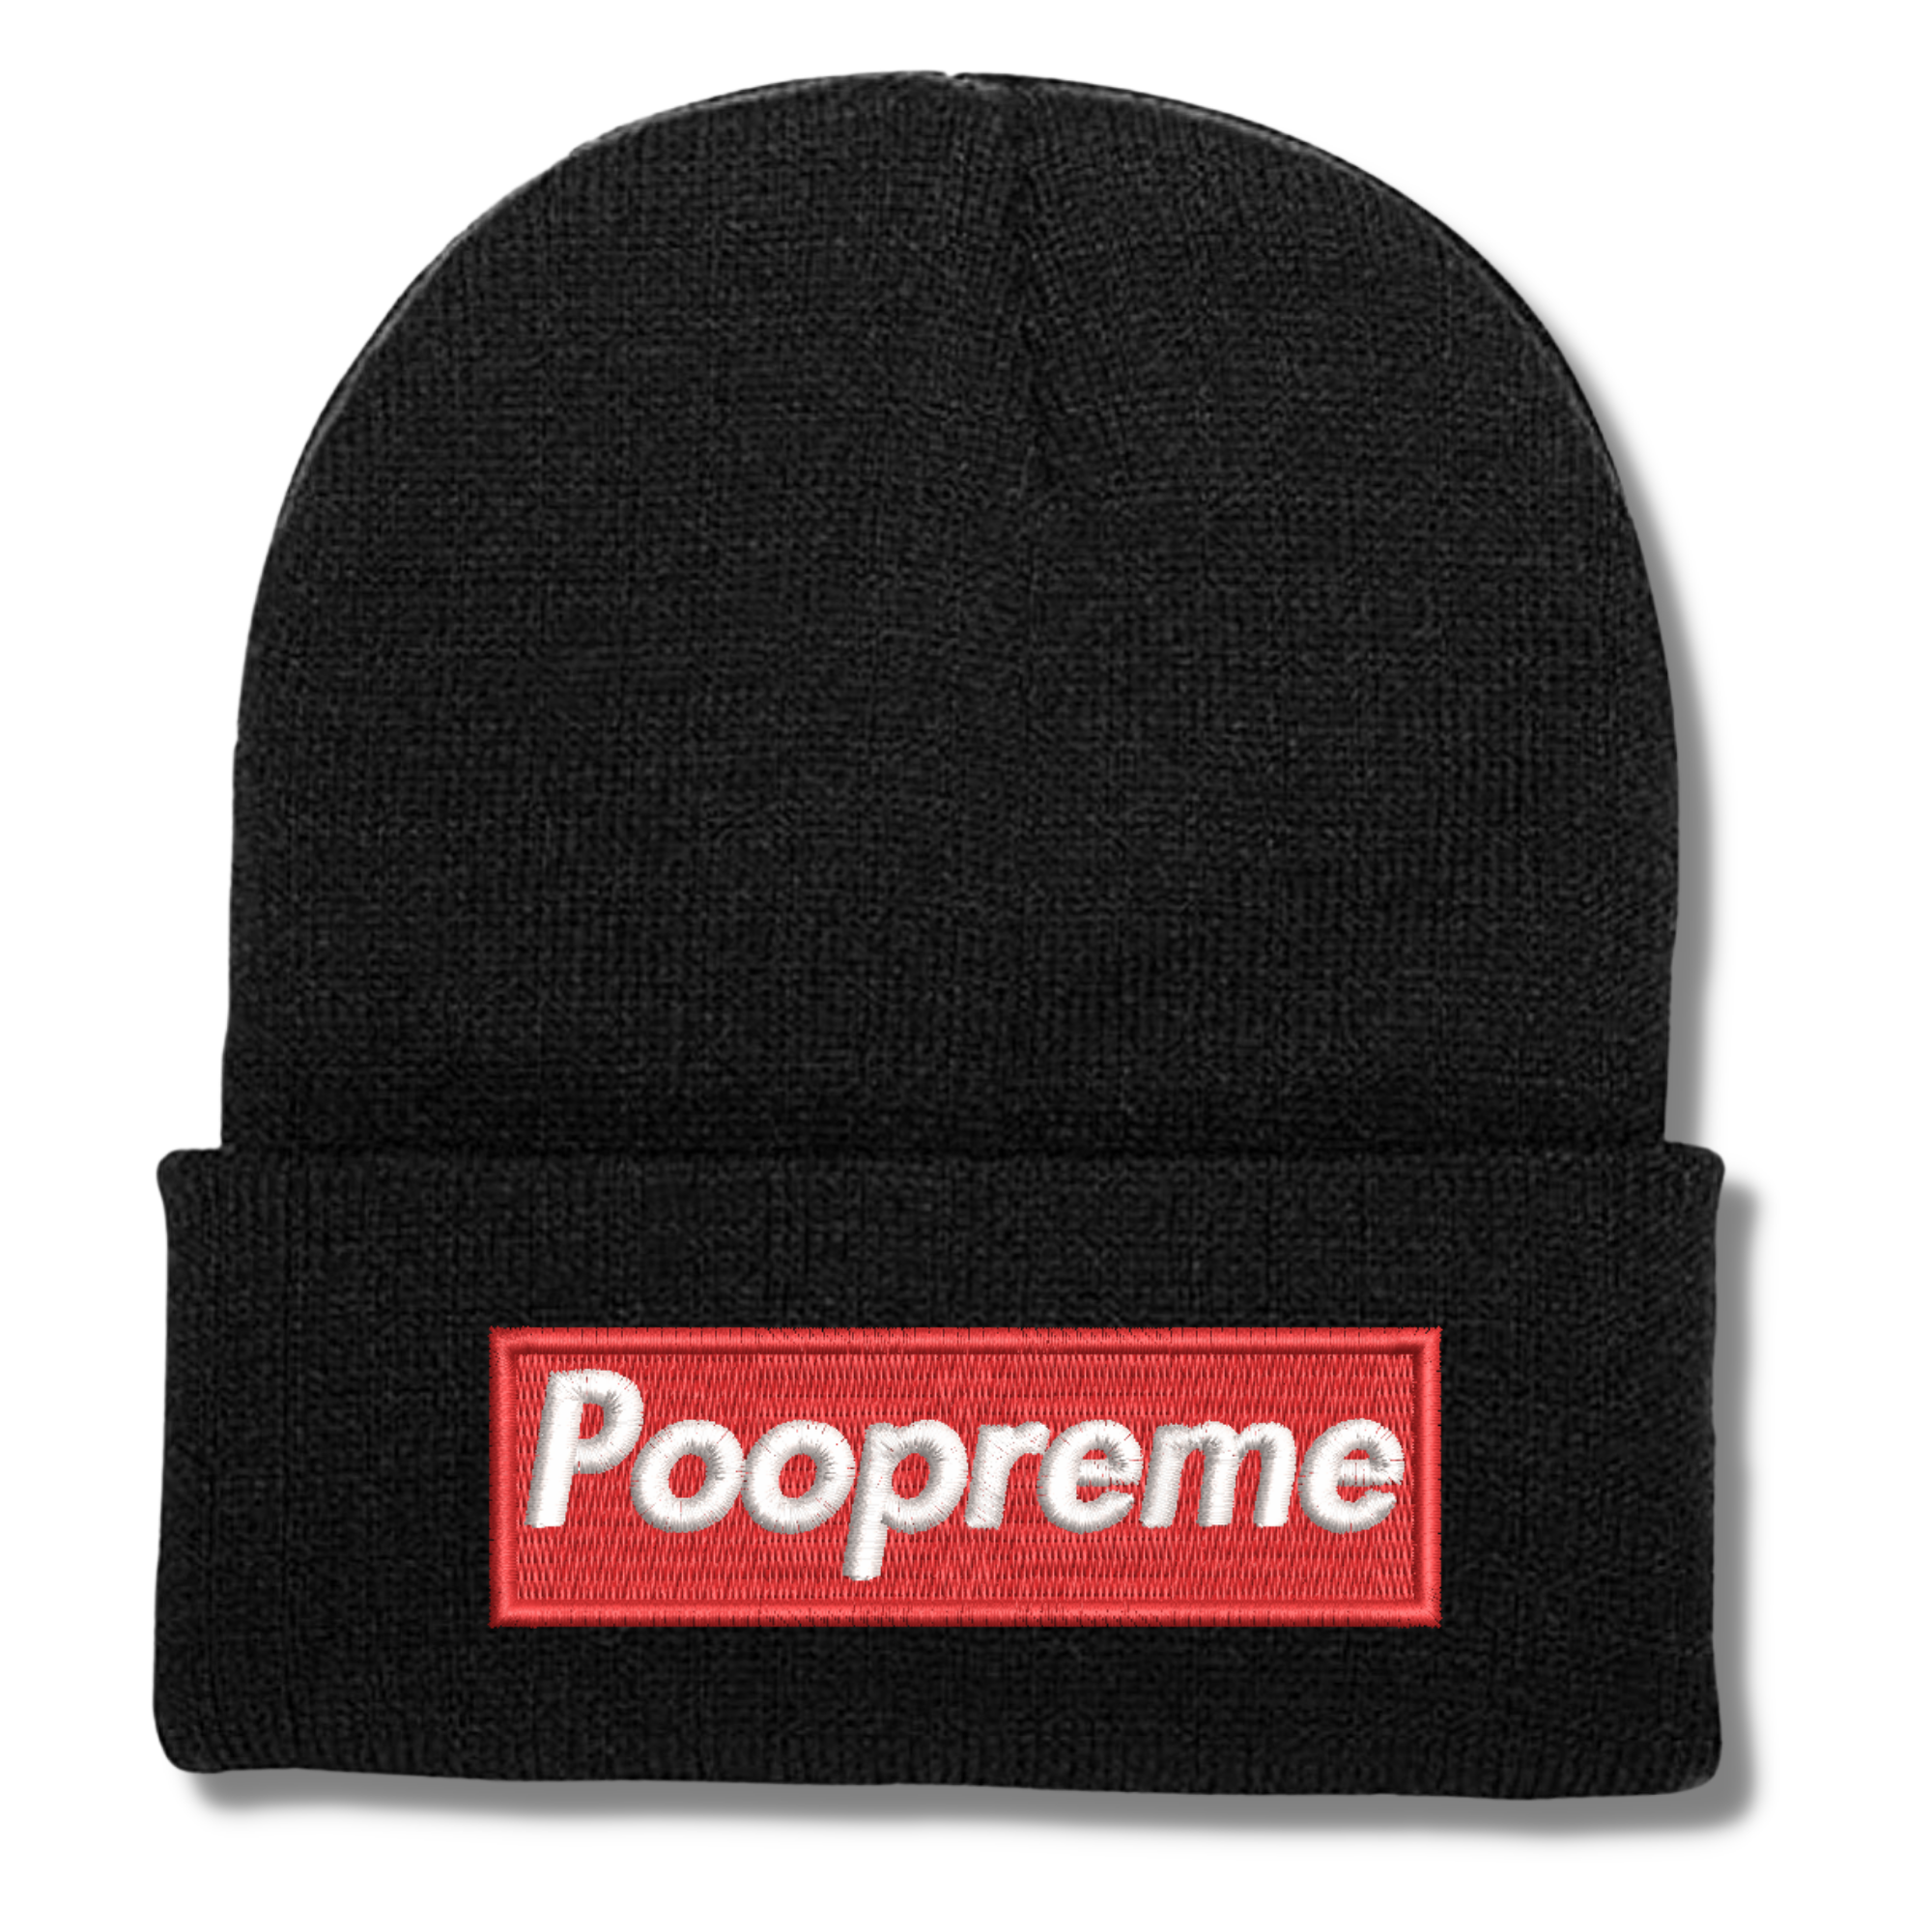 Poopreme Embroidered Beanie Hat, One Size Fits All